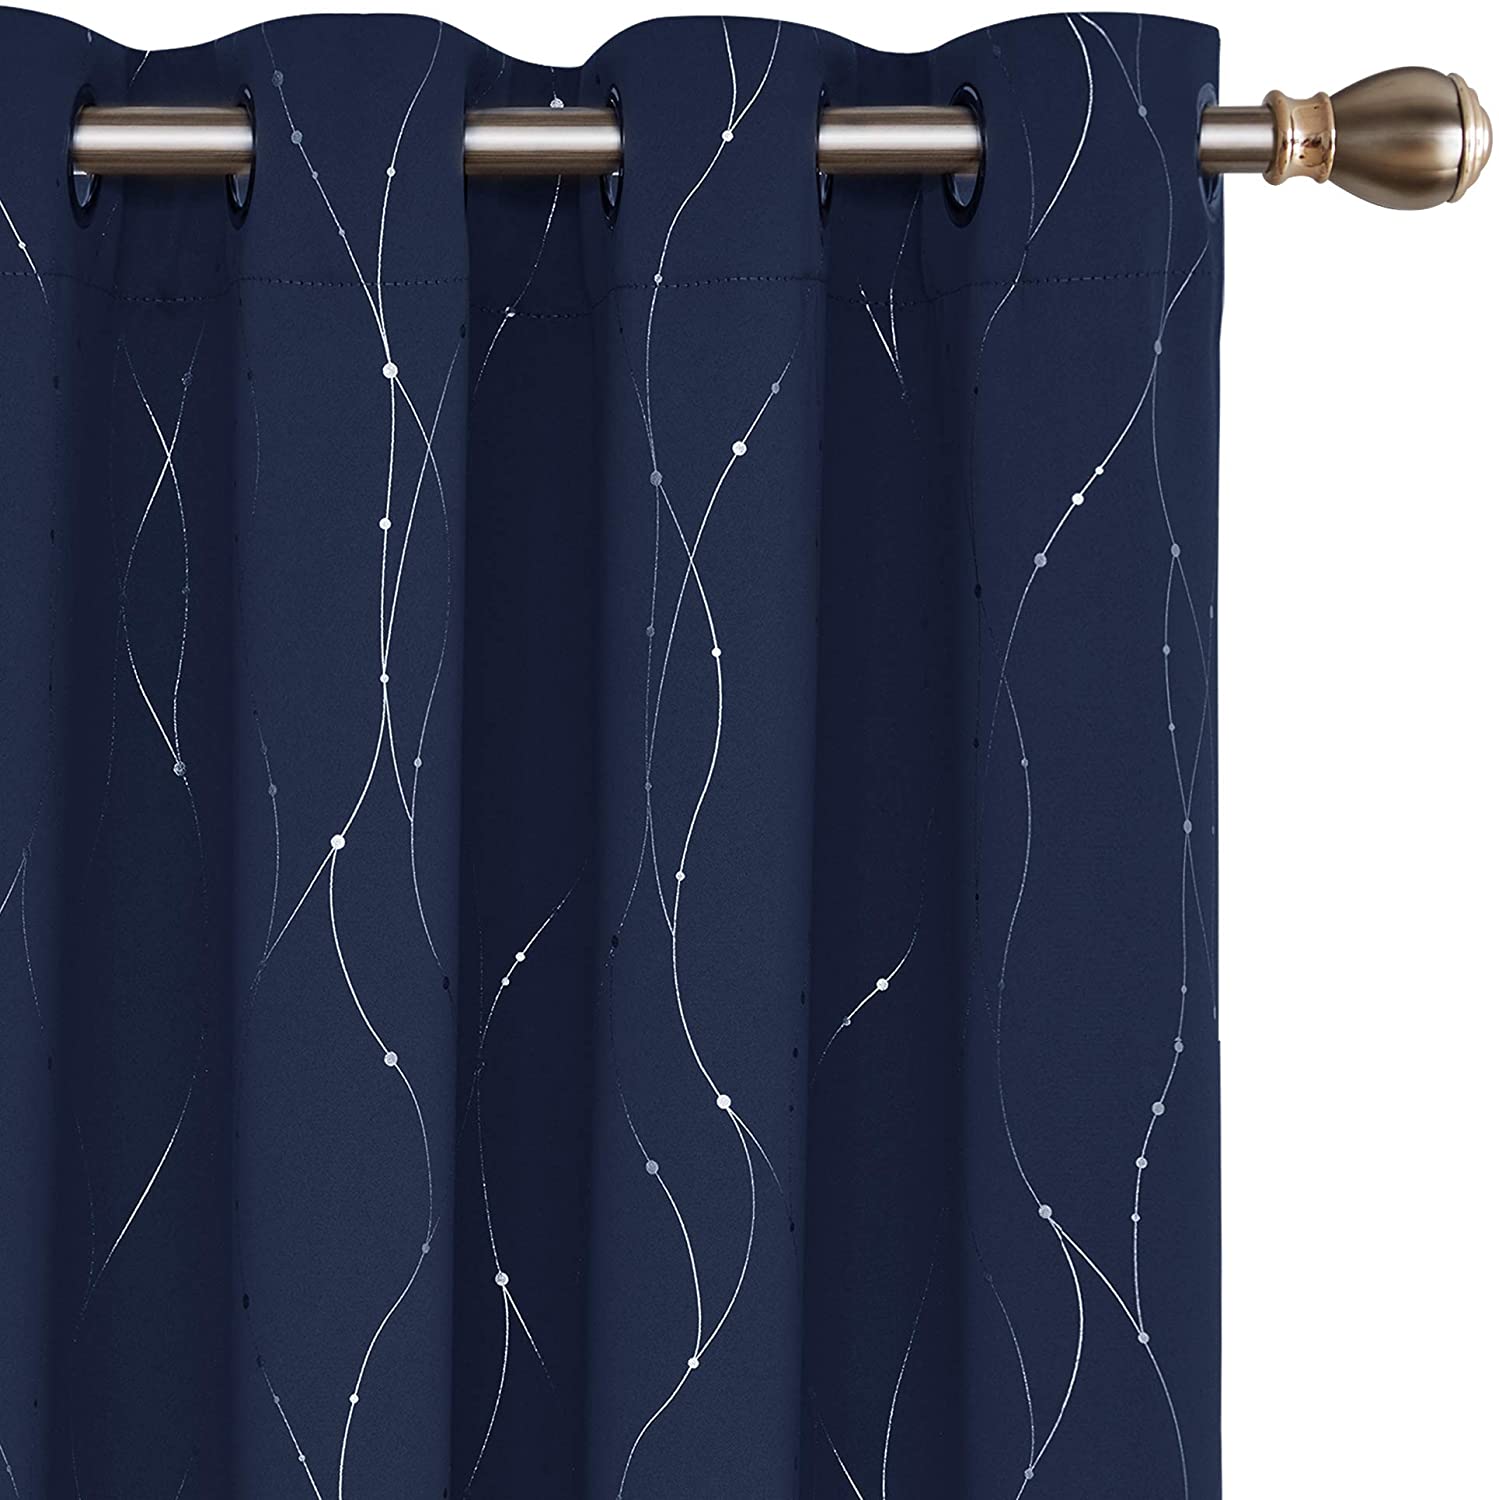 Grommet Top Drapes Wave Line And Dots Printed Bedroom